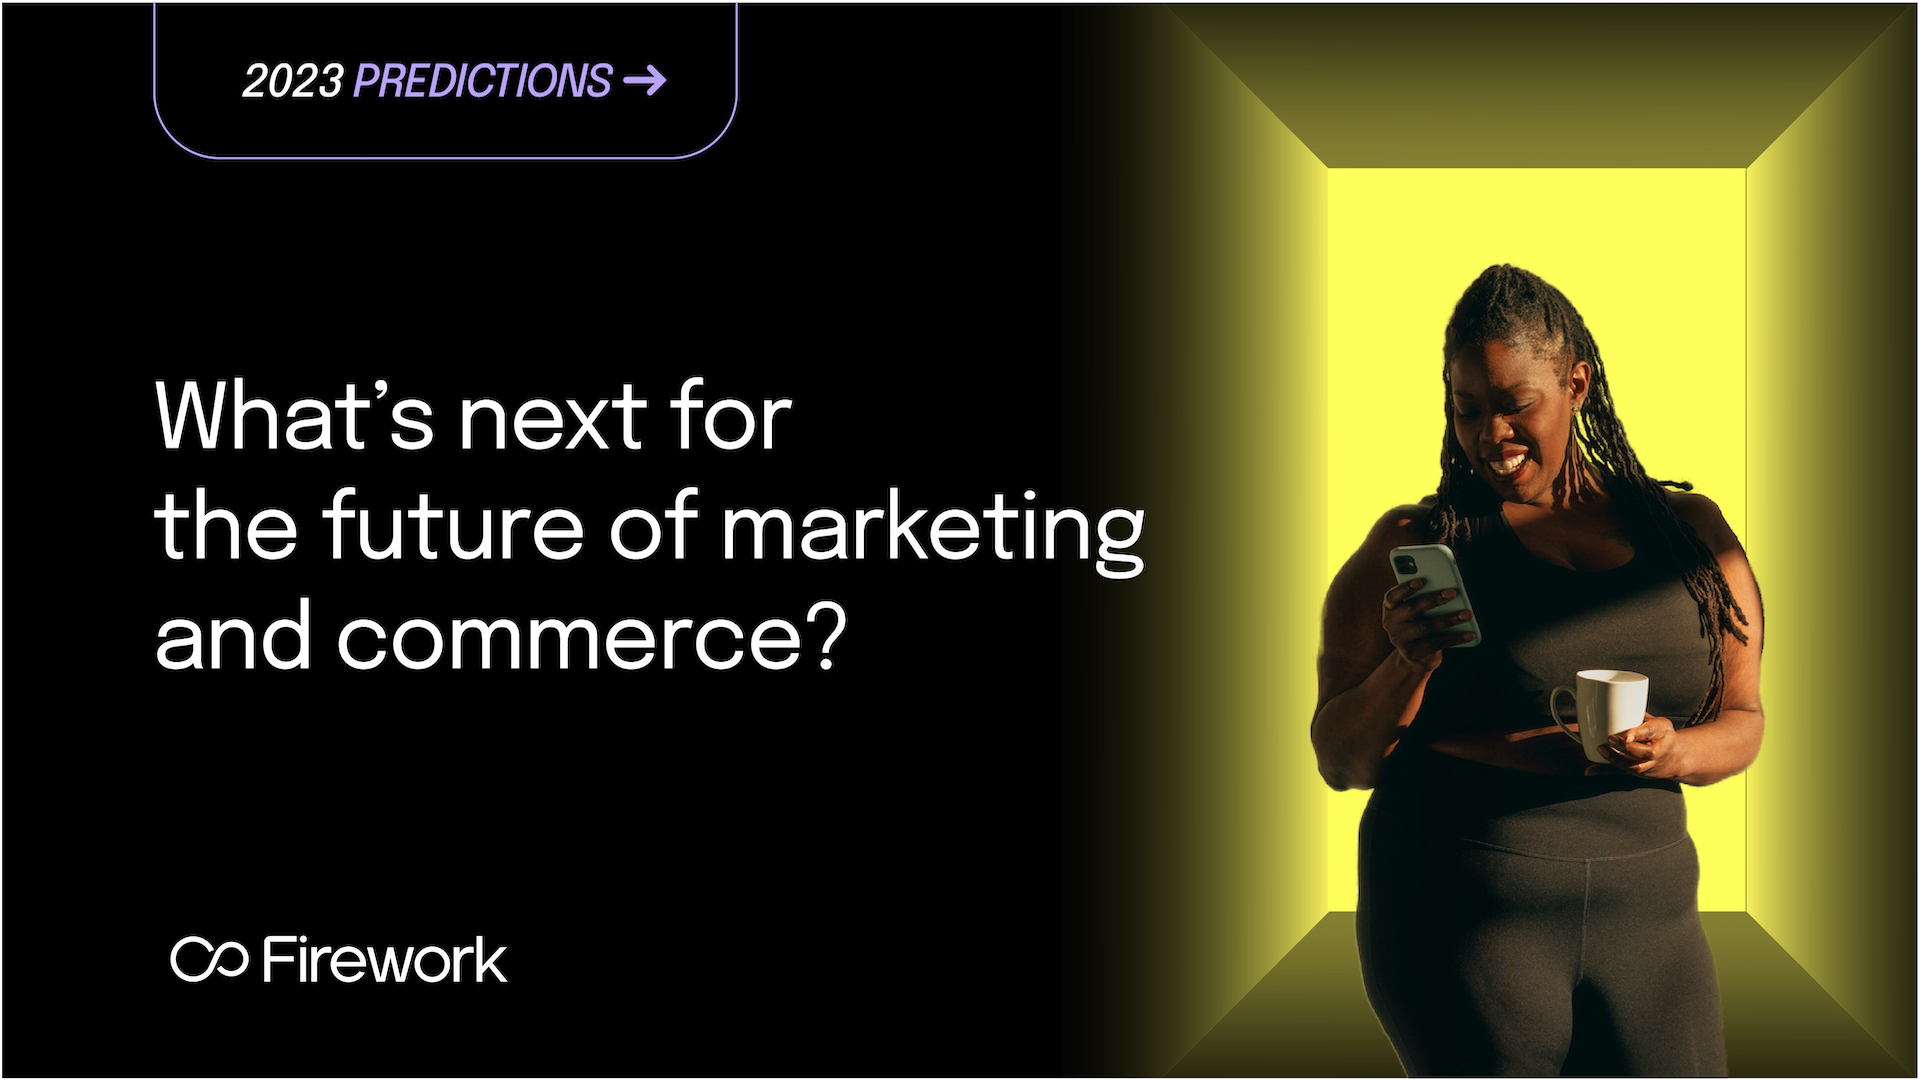 2023 Predictions. - Digital Engagement and Commerce